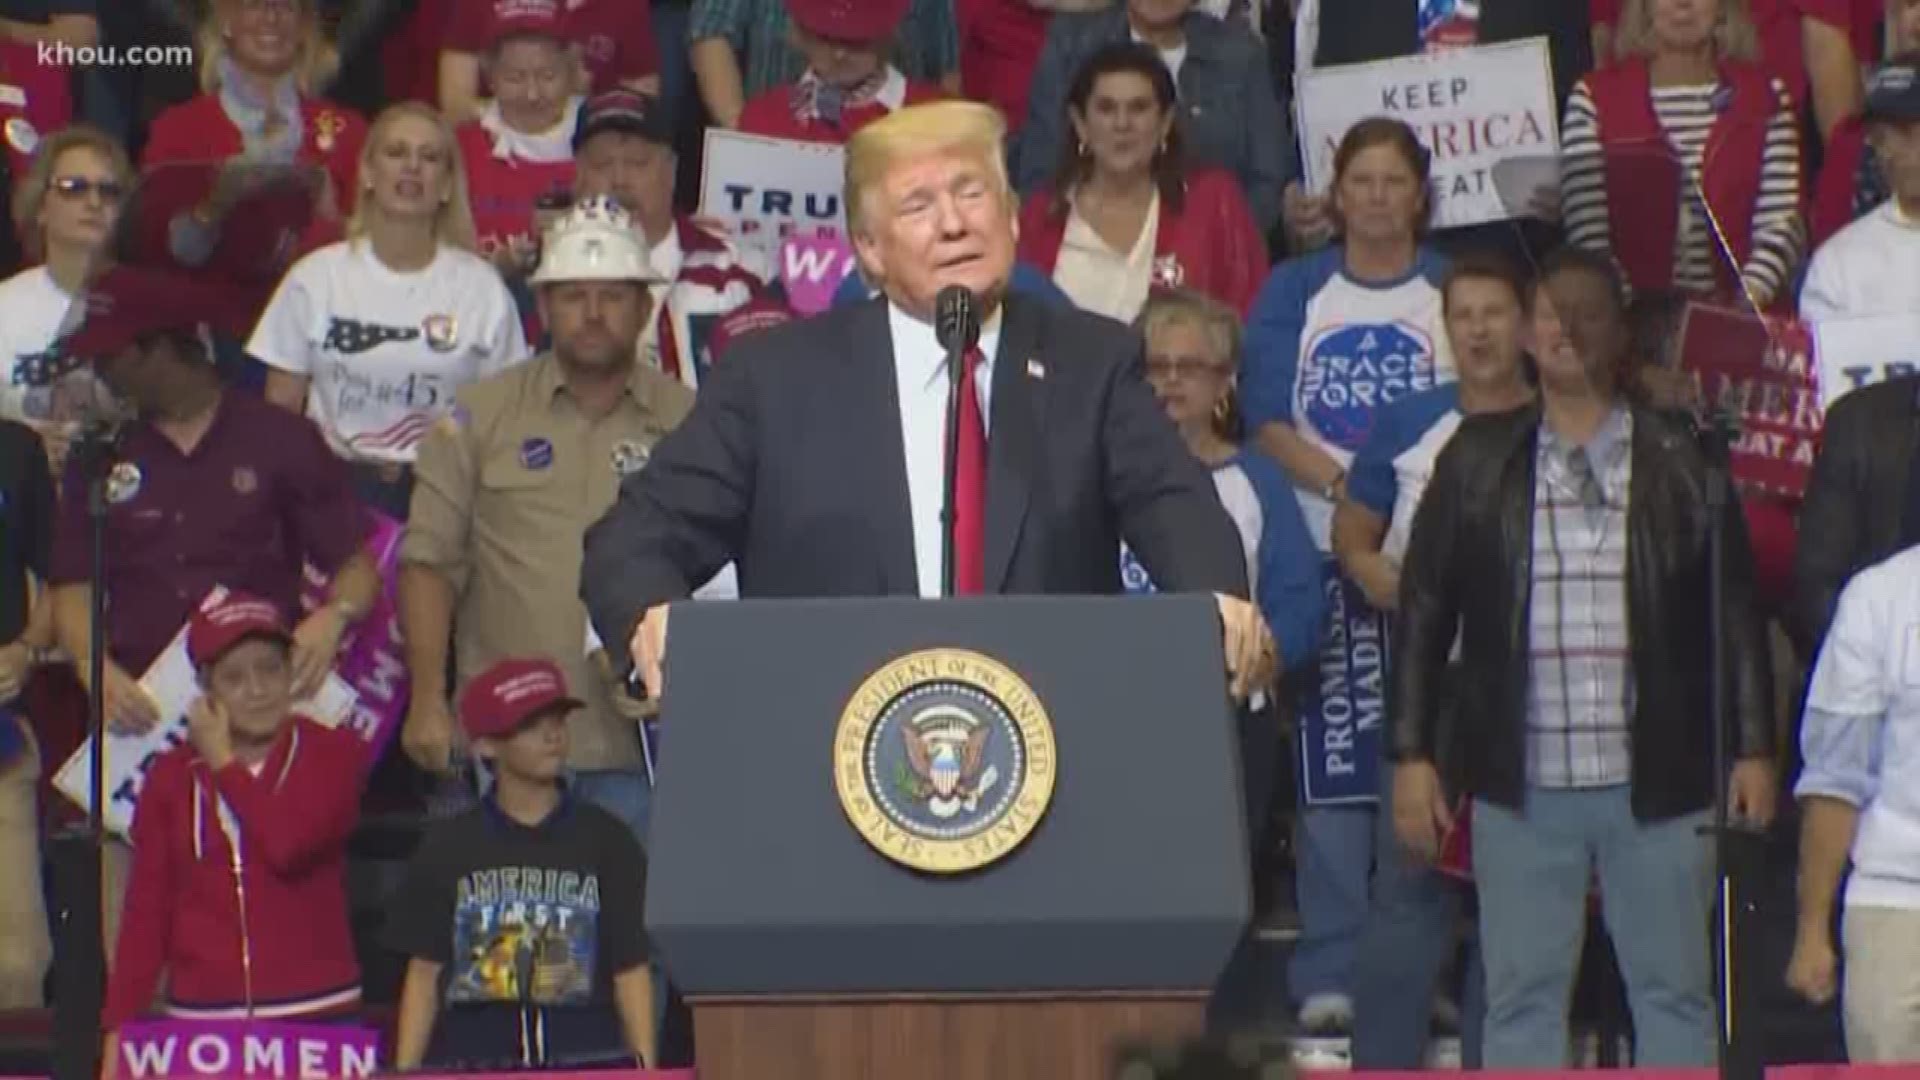 Trump visited Houston Monday to show support for Sen. Ted Cruz and hold a Make America Great Again rally. Many fans showed up to the Toyota Center hours early to attend.